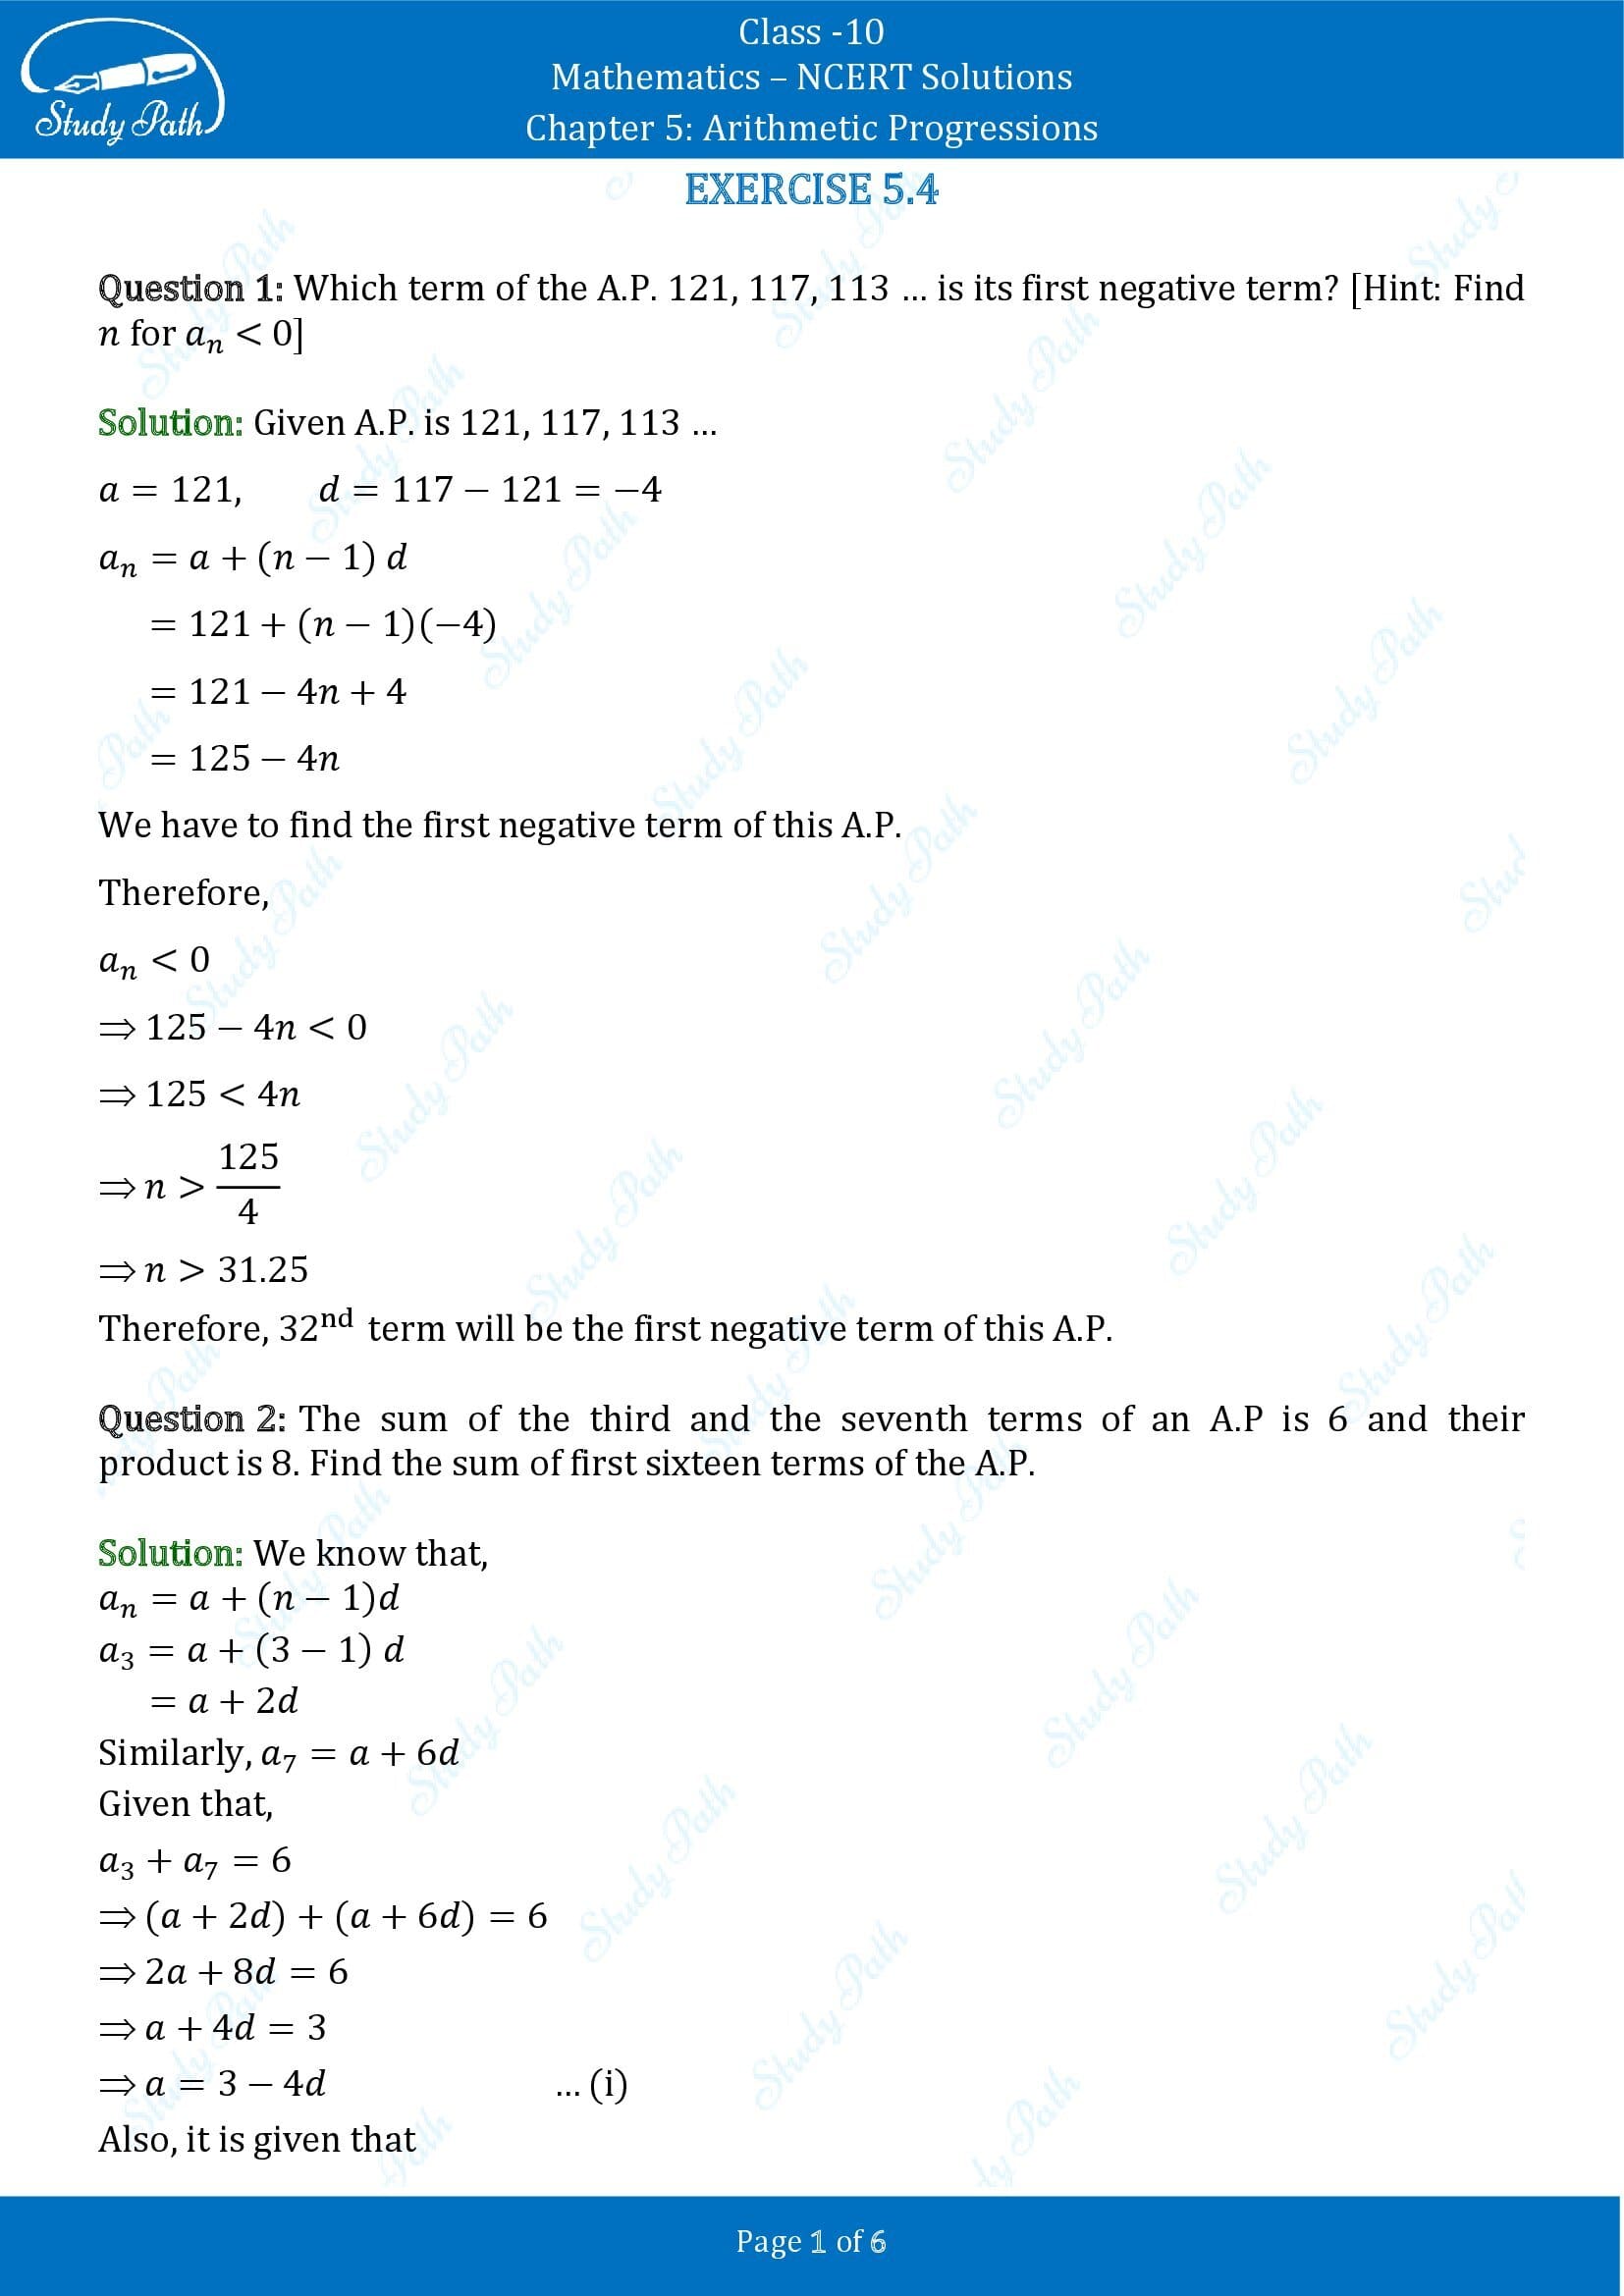 NCERT Solutions for Class 10 Maths Chapter 5 Arithmetic Progressions Exercise 5.4 00001